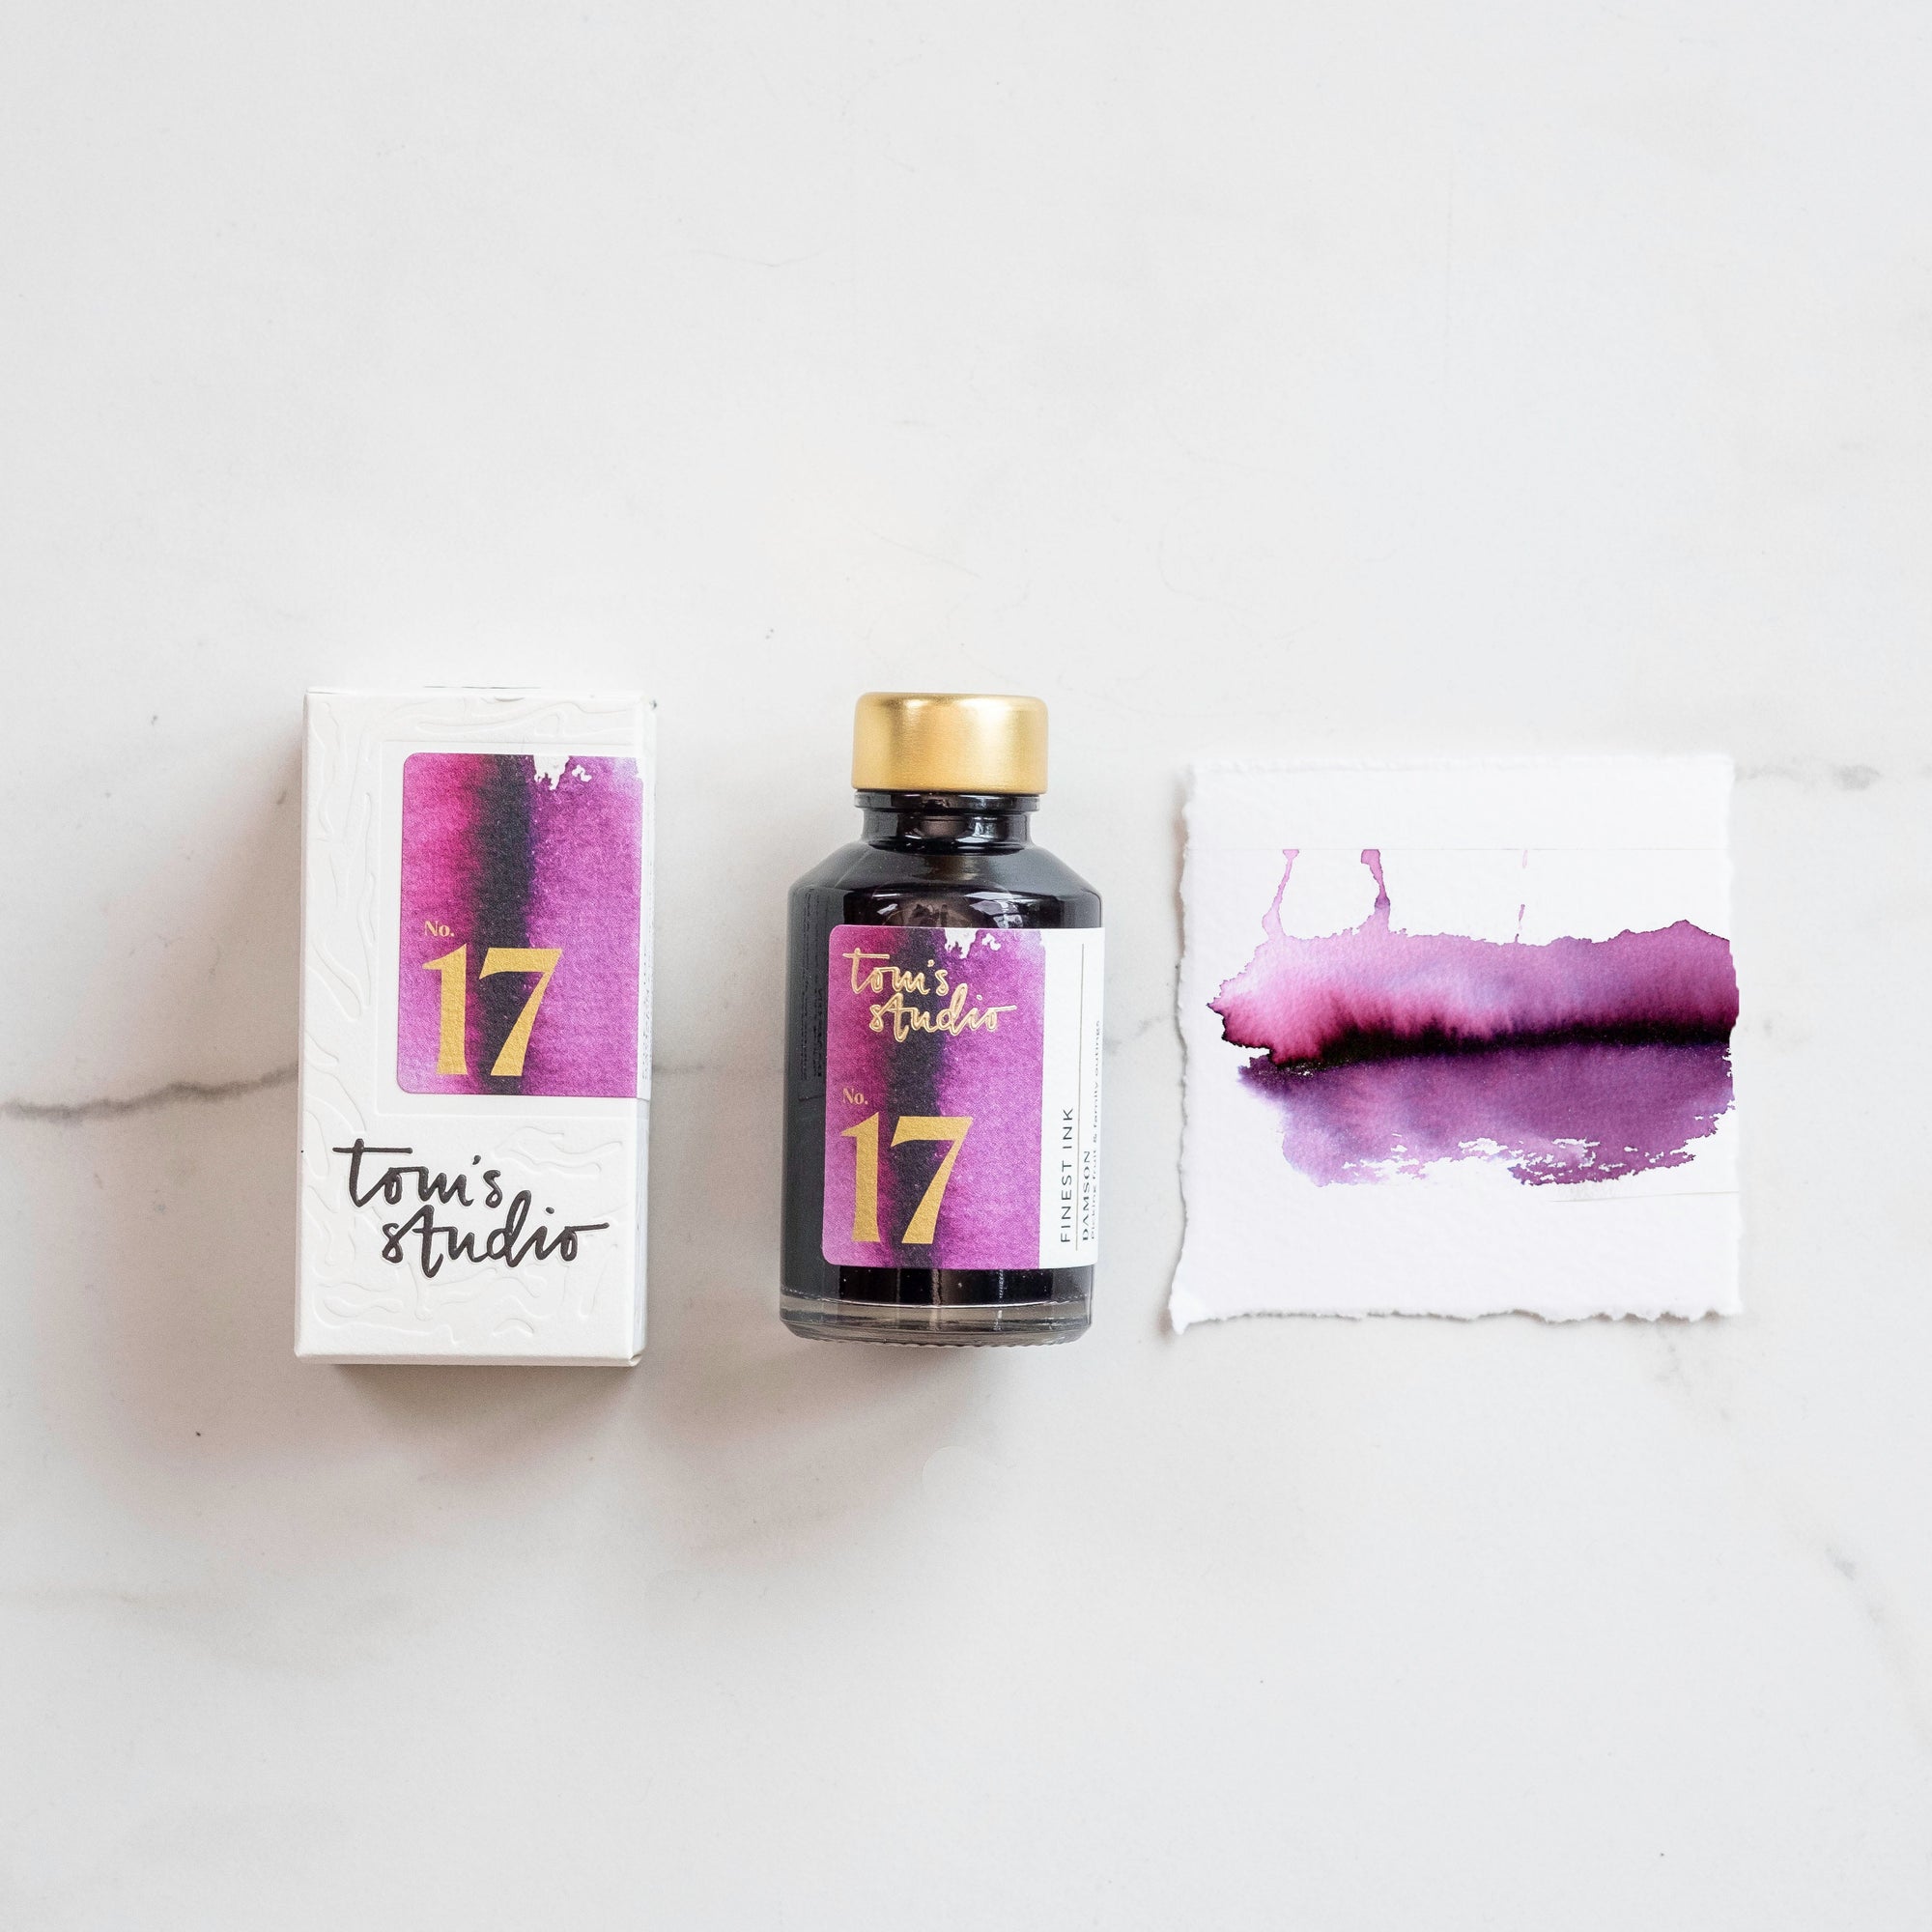 Tom's Studio Damson Fountain Pen Ink with two pens with inky goodness on paper with an ink swatch demonstrating the colour